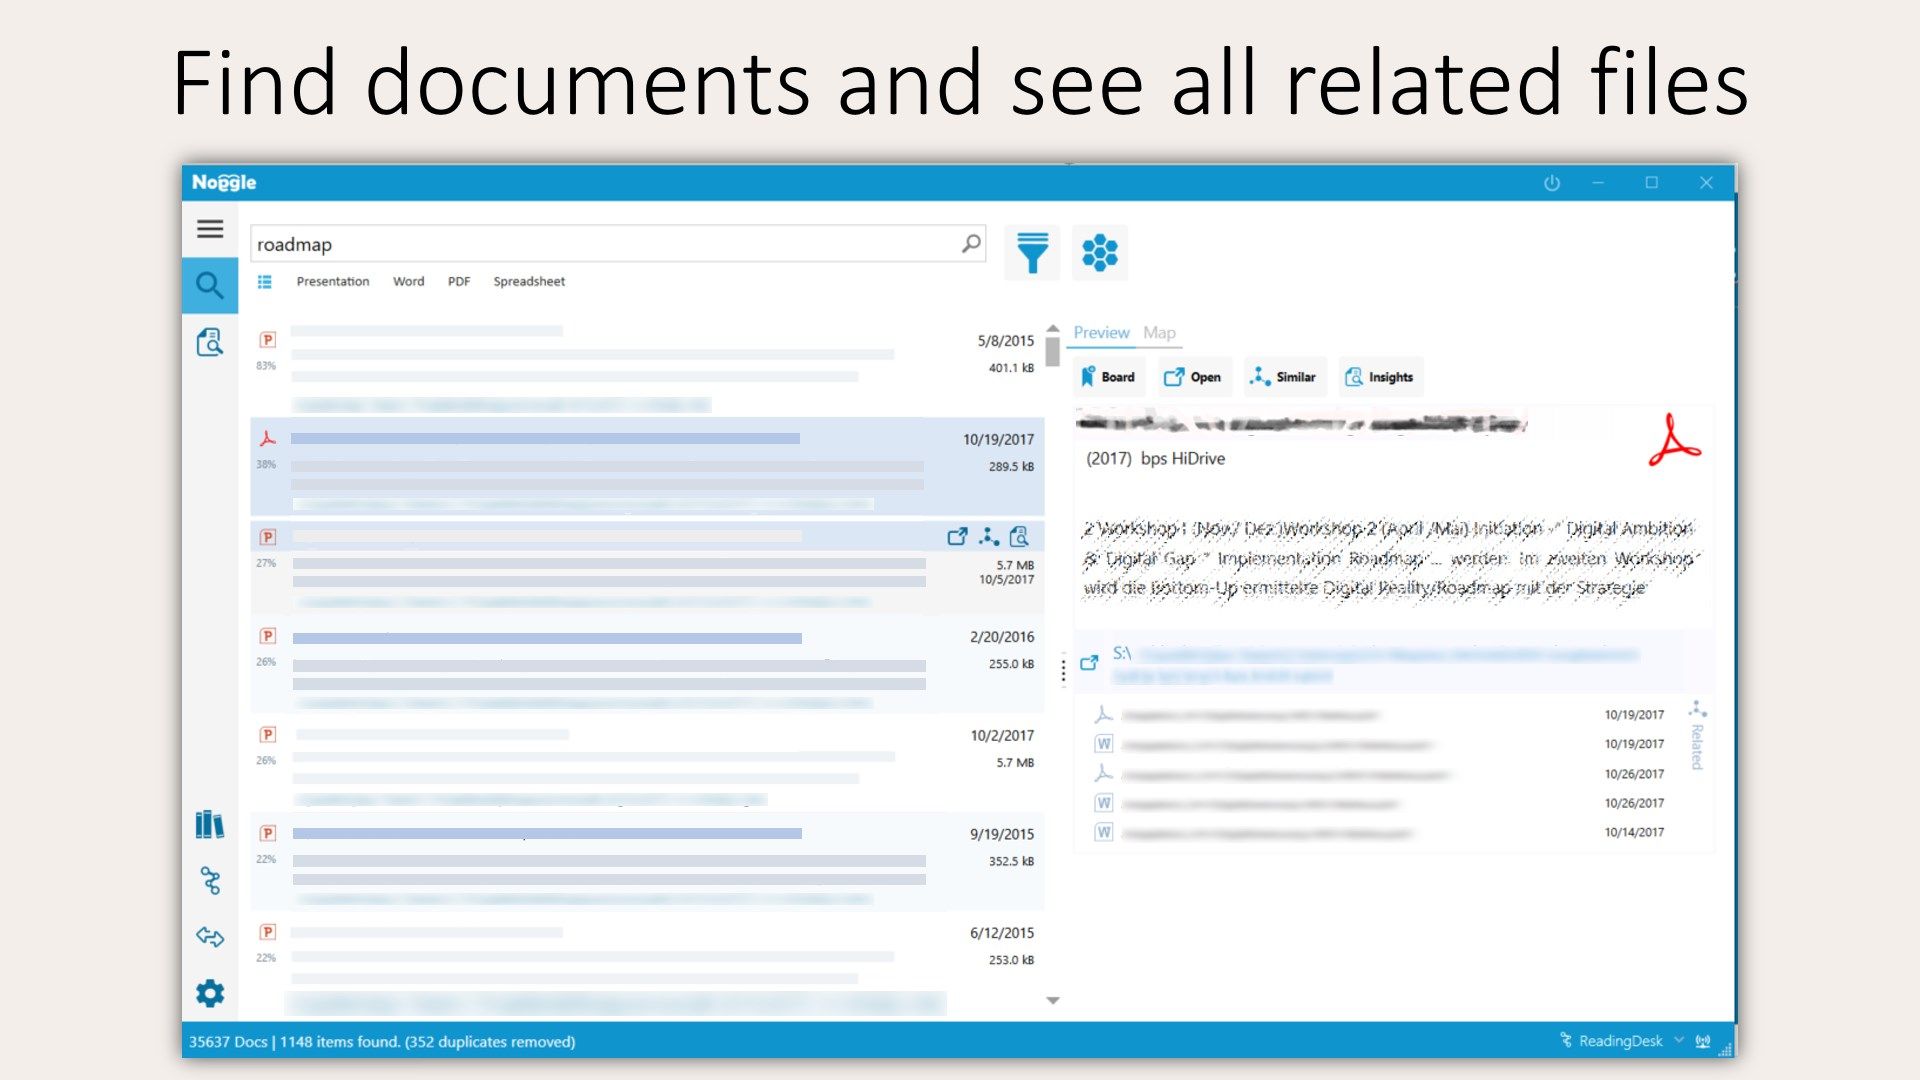 Find documents and see all related files